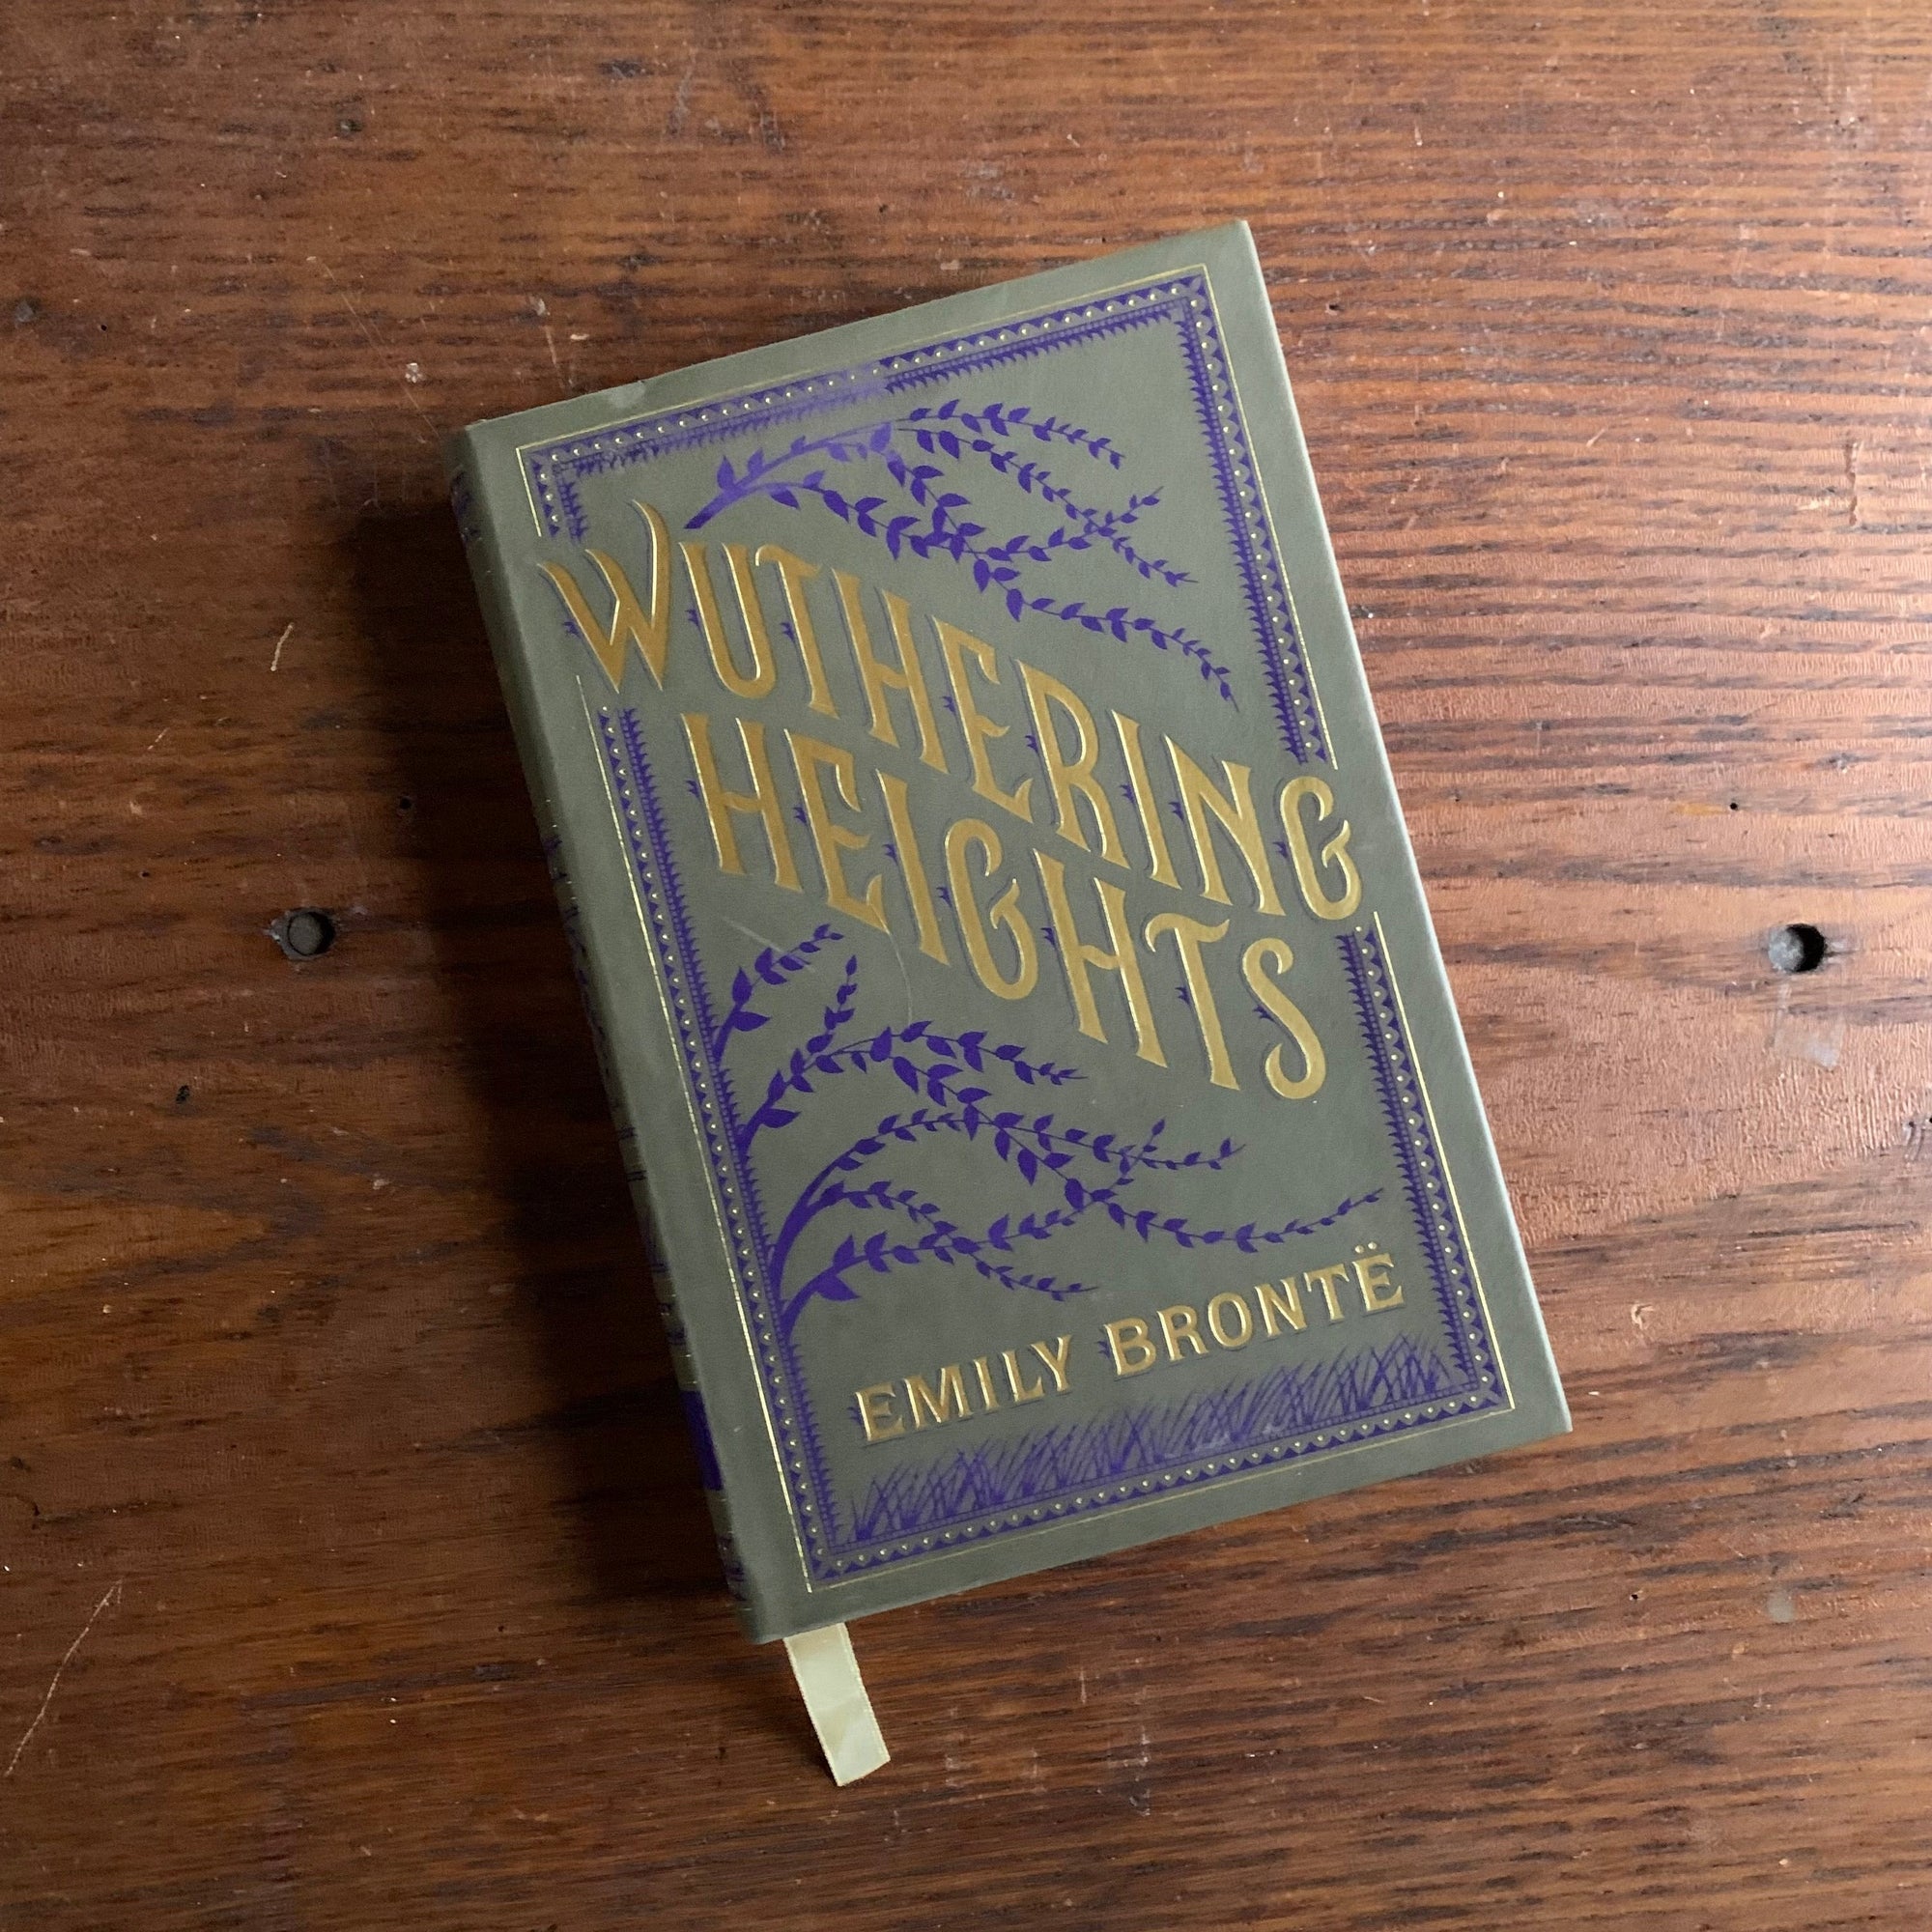 Wuthering Heights by Emily Bronte - Barnes & Noble Collectible Edition